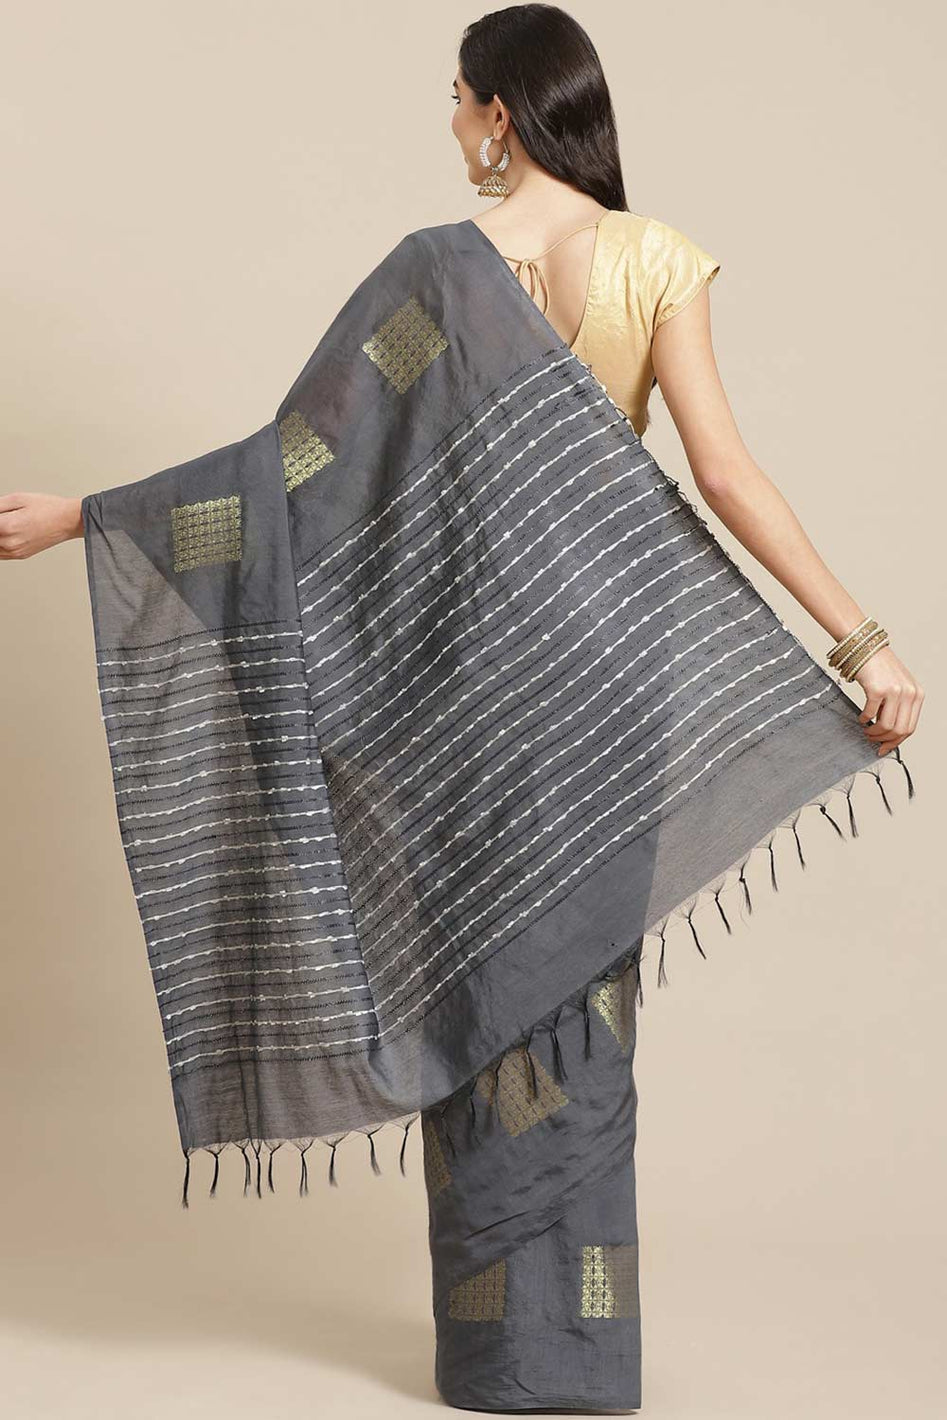 Gray Semi Silk Saree - Indian Clothing in Denver, CO, Aurora, CO, Boulder, CO, Fort Collins, CO, Colorado Springs, CO, Parker, CO, Highlands Ranch, CO, Cherry Creek, CO, Centennial, CO, and Longmont, CO. Nationwide shipping USA - India Fashion X